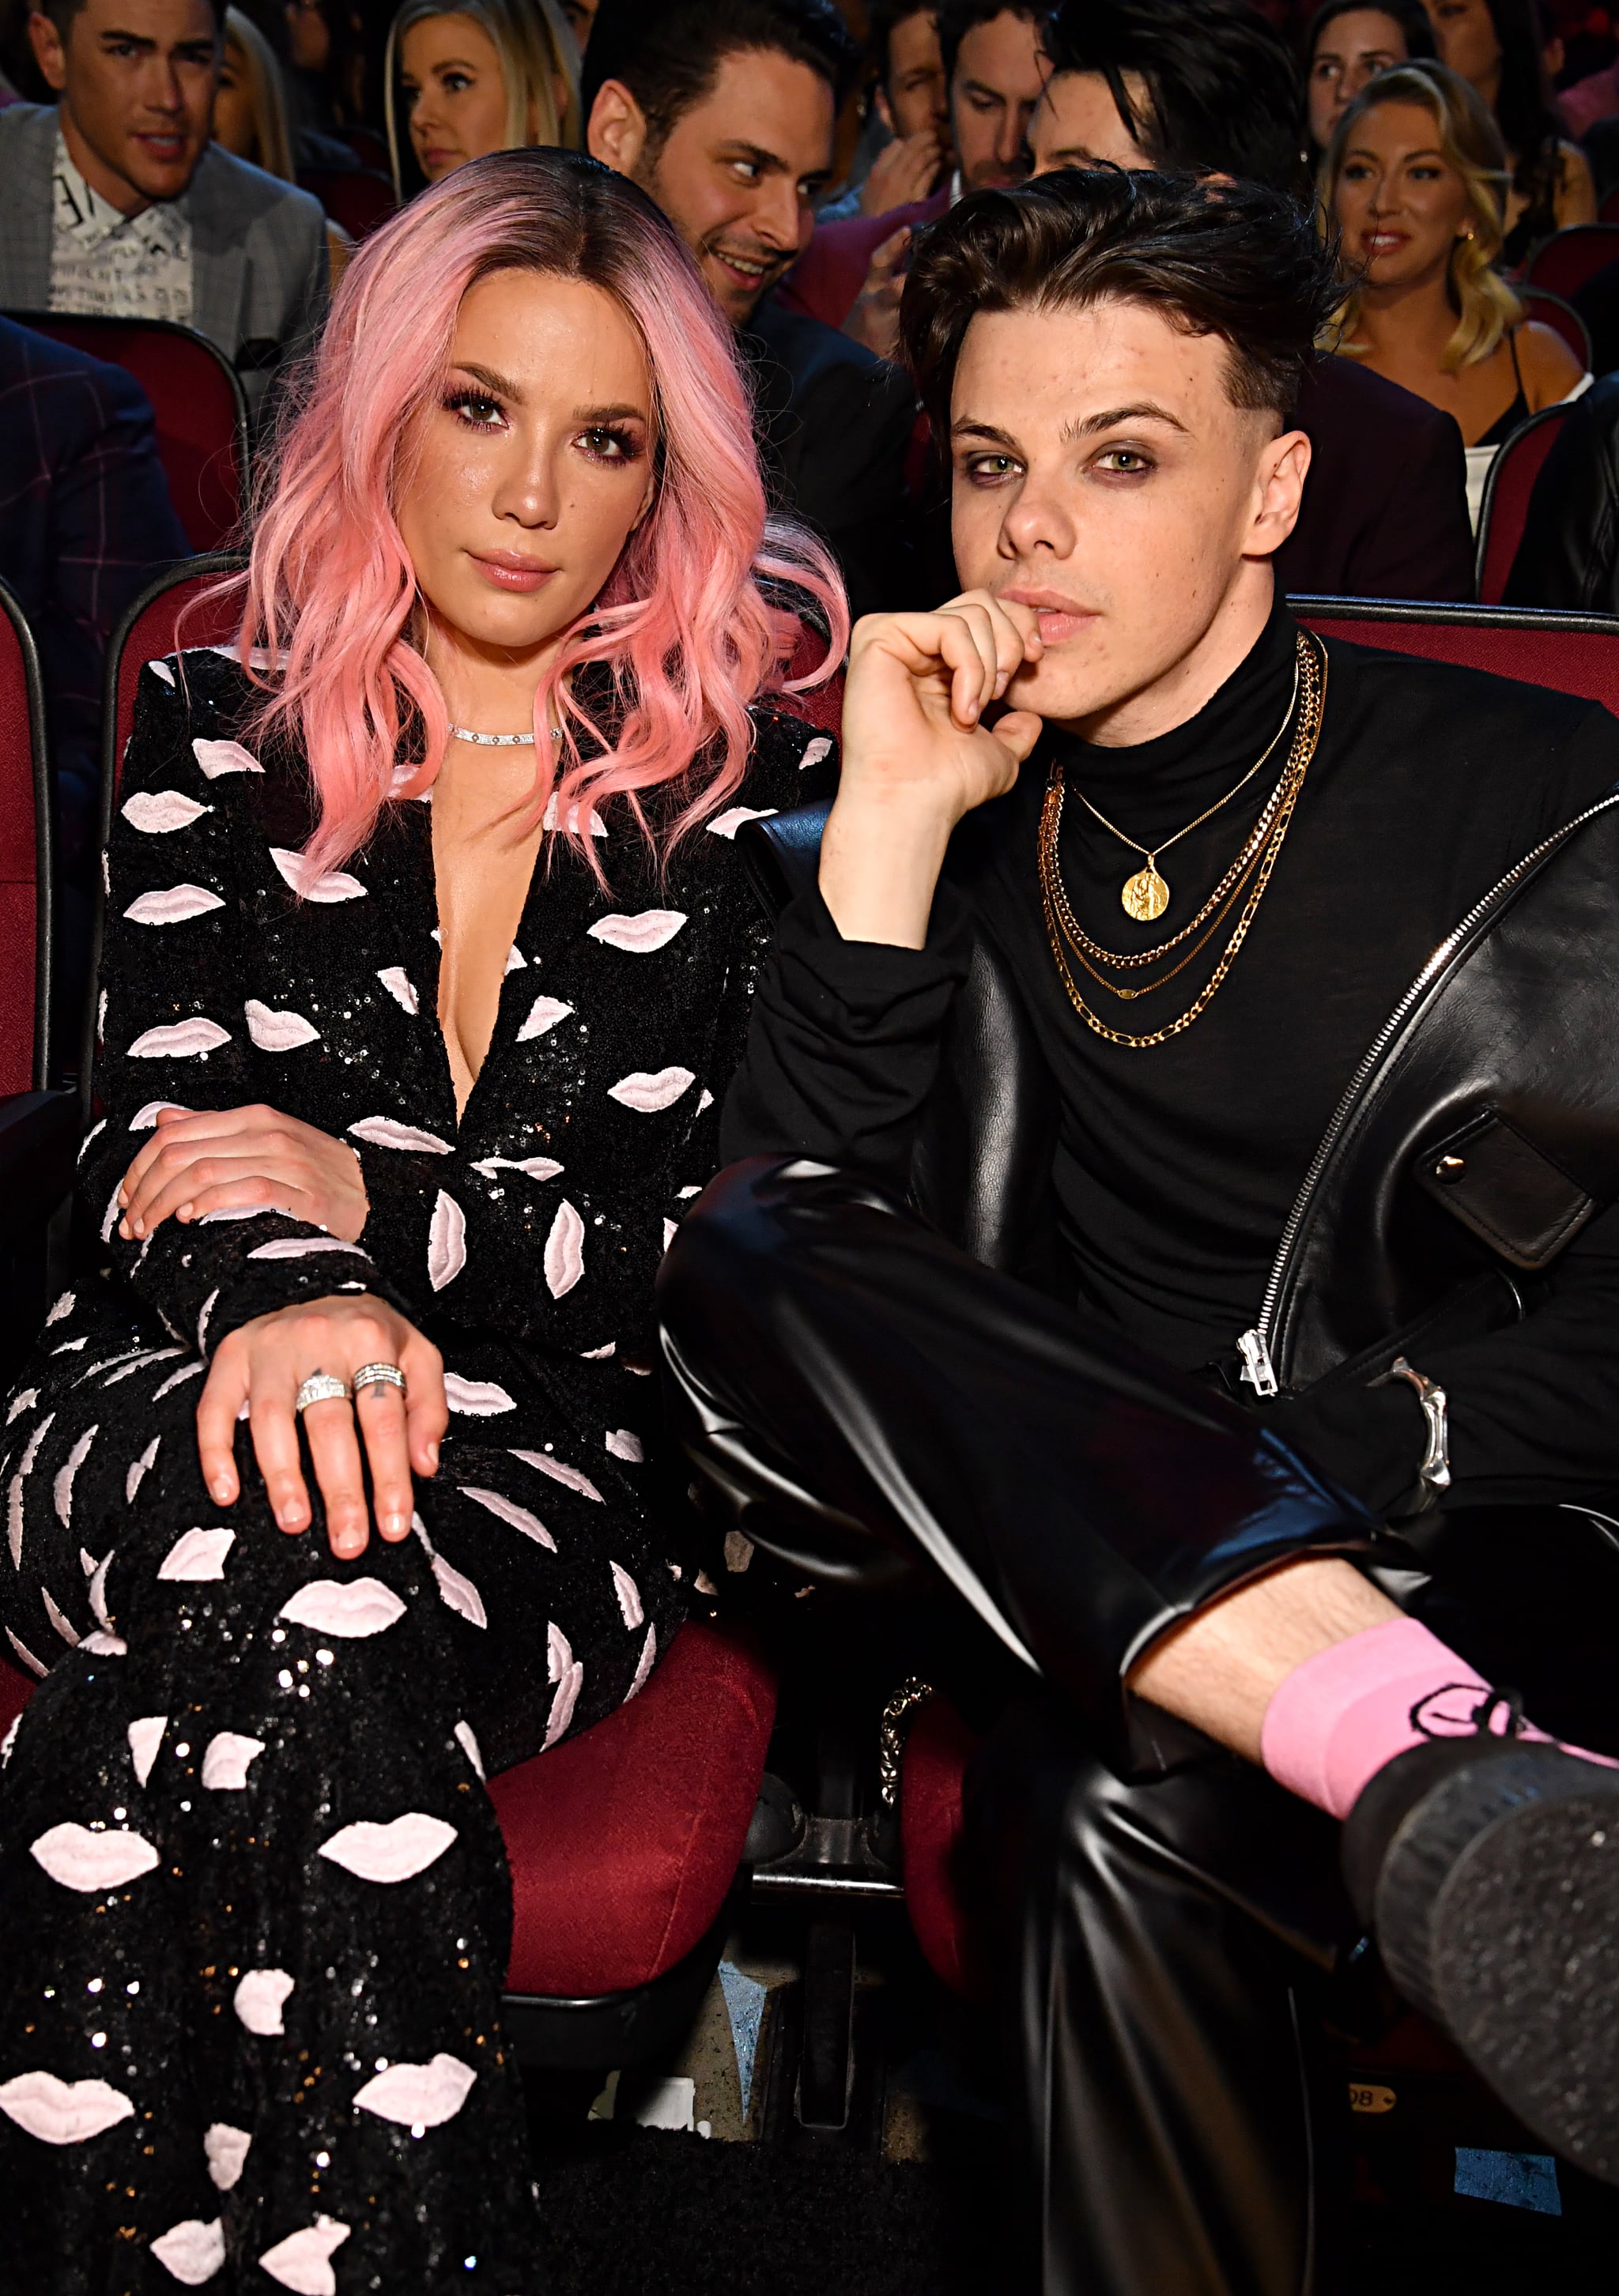 LOS ANGELES, CALIFORNIA - MARCH 14: (EDITORIAL USE ONLY. NO COMMERCIAL USE)  (L-R) Halsey and Yungblud attend the 2019 iHeartRadio Music Awards which broadcasted live on FOX at the Microsoft Theatre on March 14, 2019 in Los Angeles, California. (Photo by Jeff Kravitz/FilmMagic for iHeartMedia )